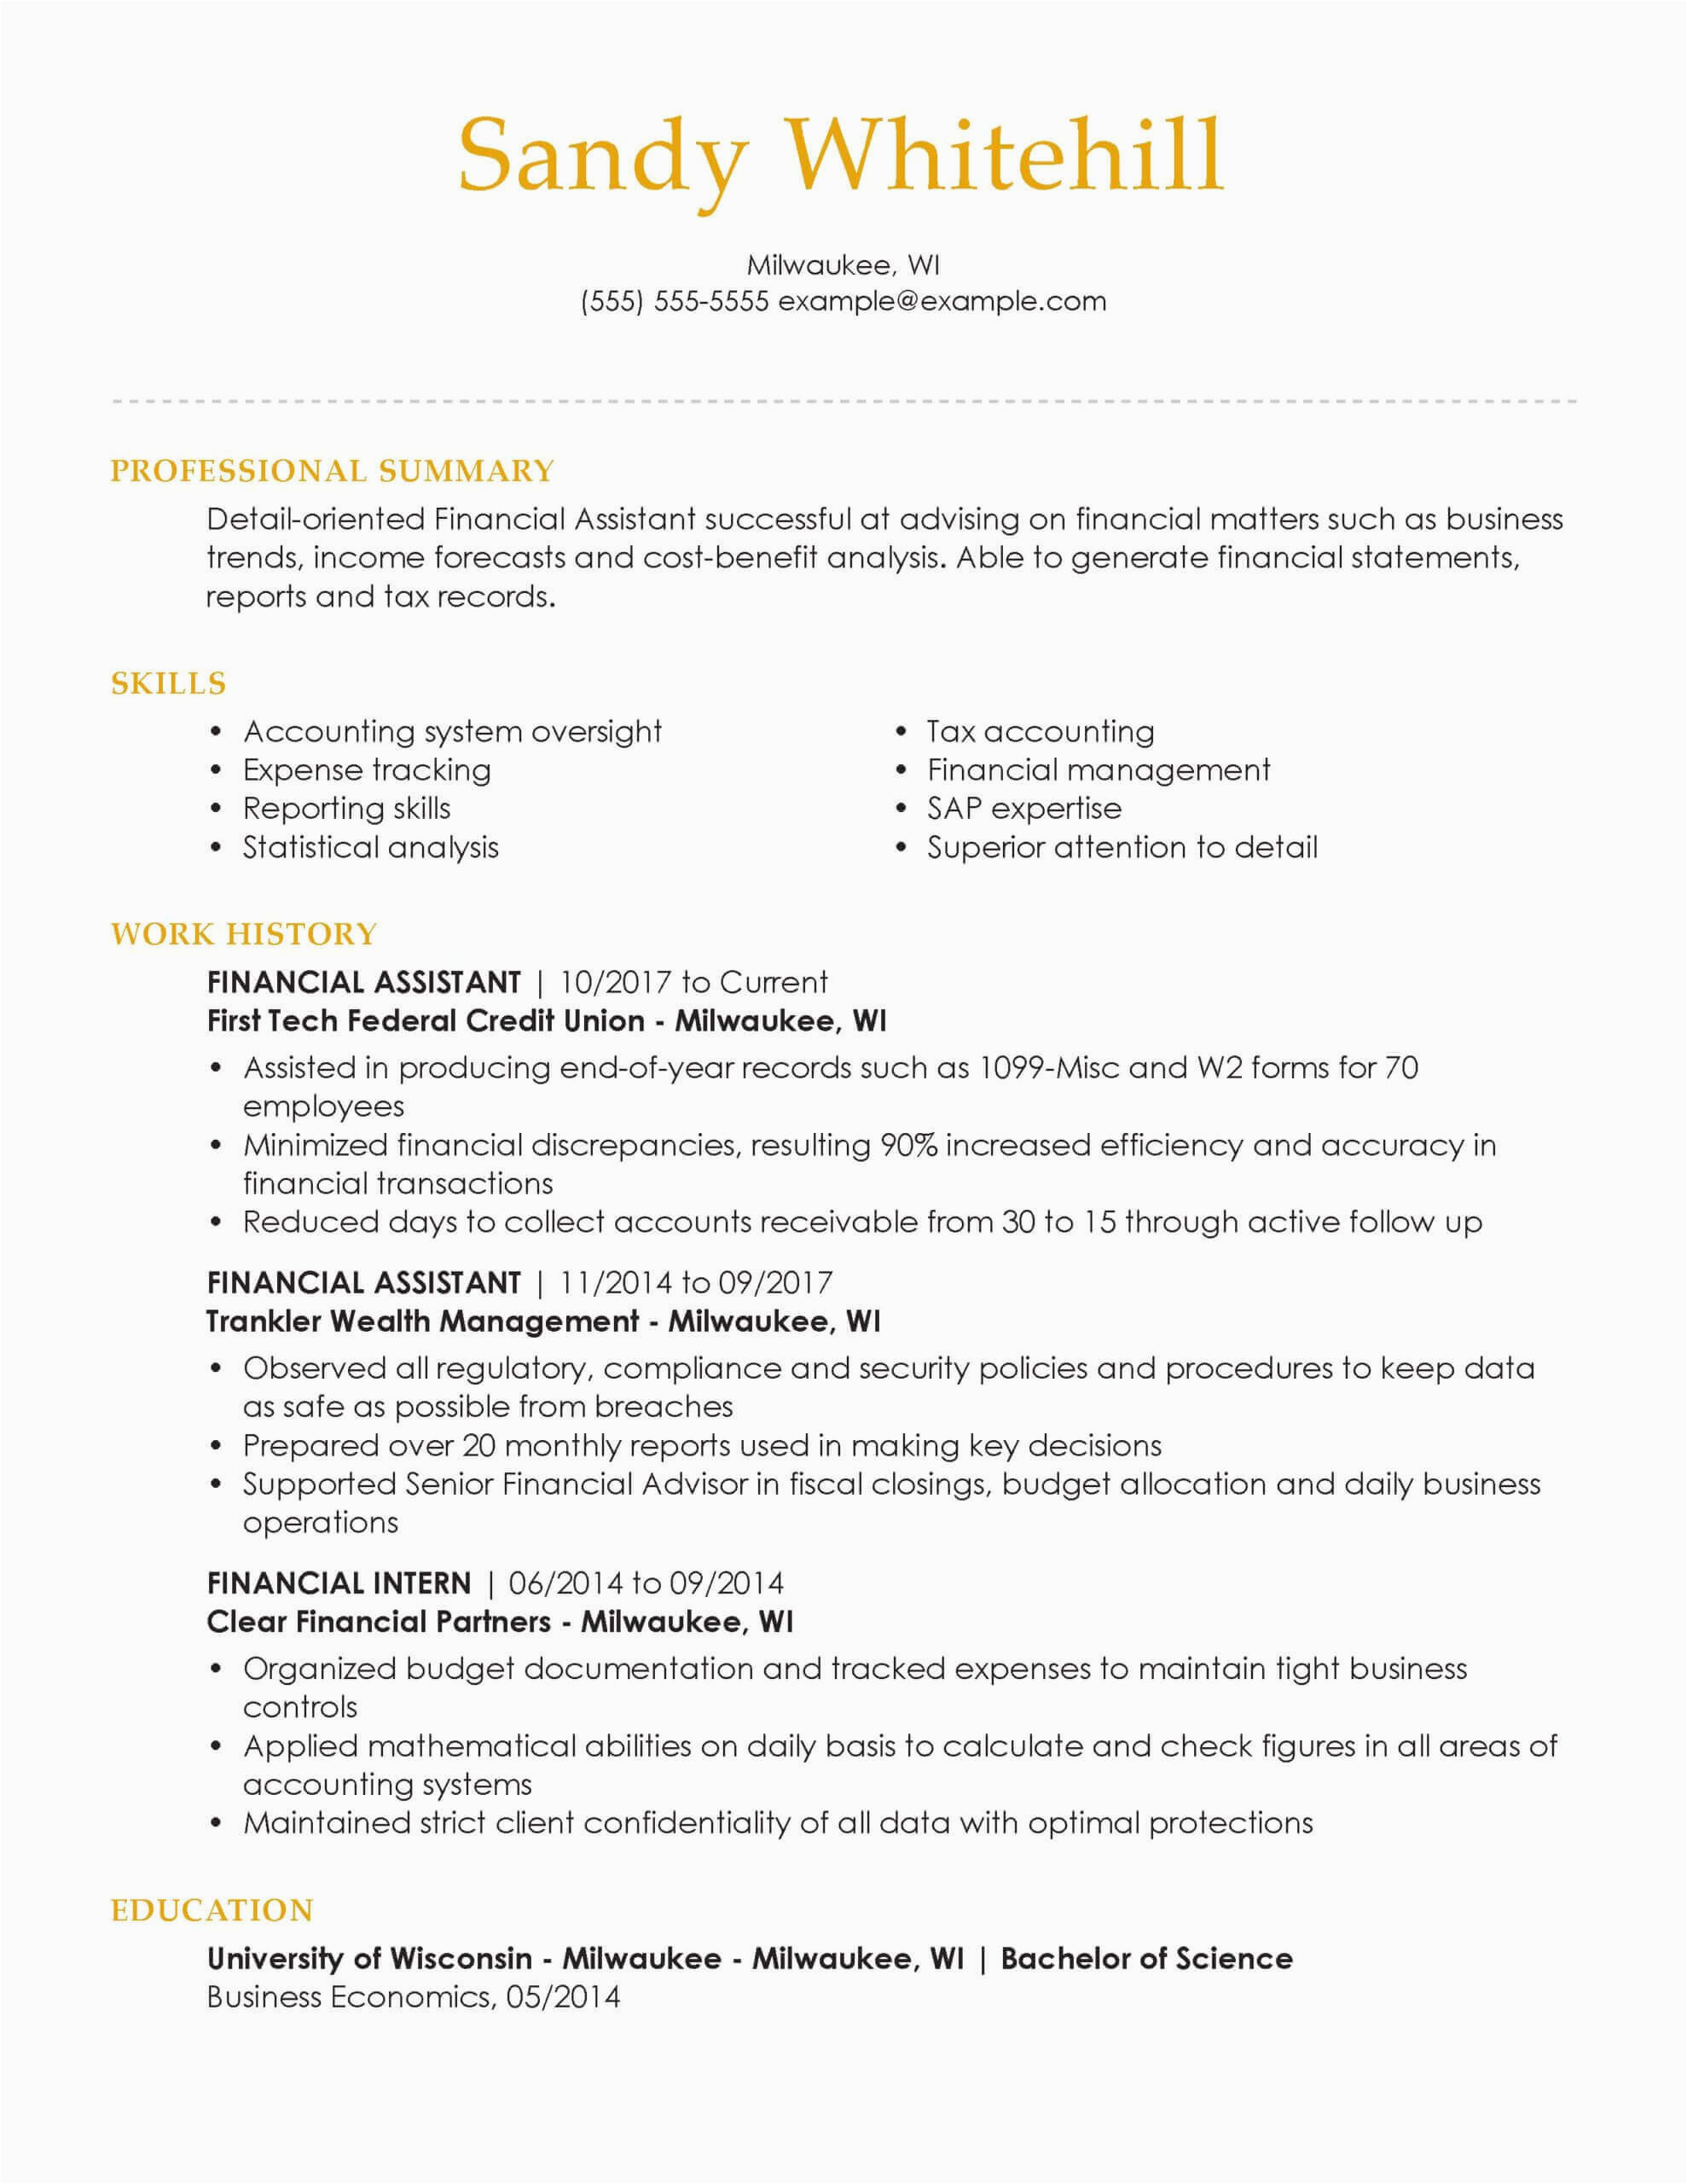 Sample Resume to Apply for Bank Jobs Professional Banking Resume Examples for 2021